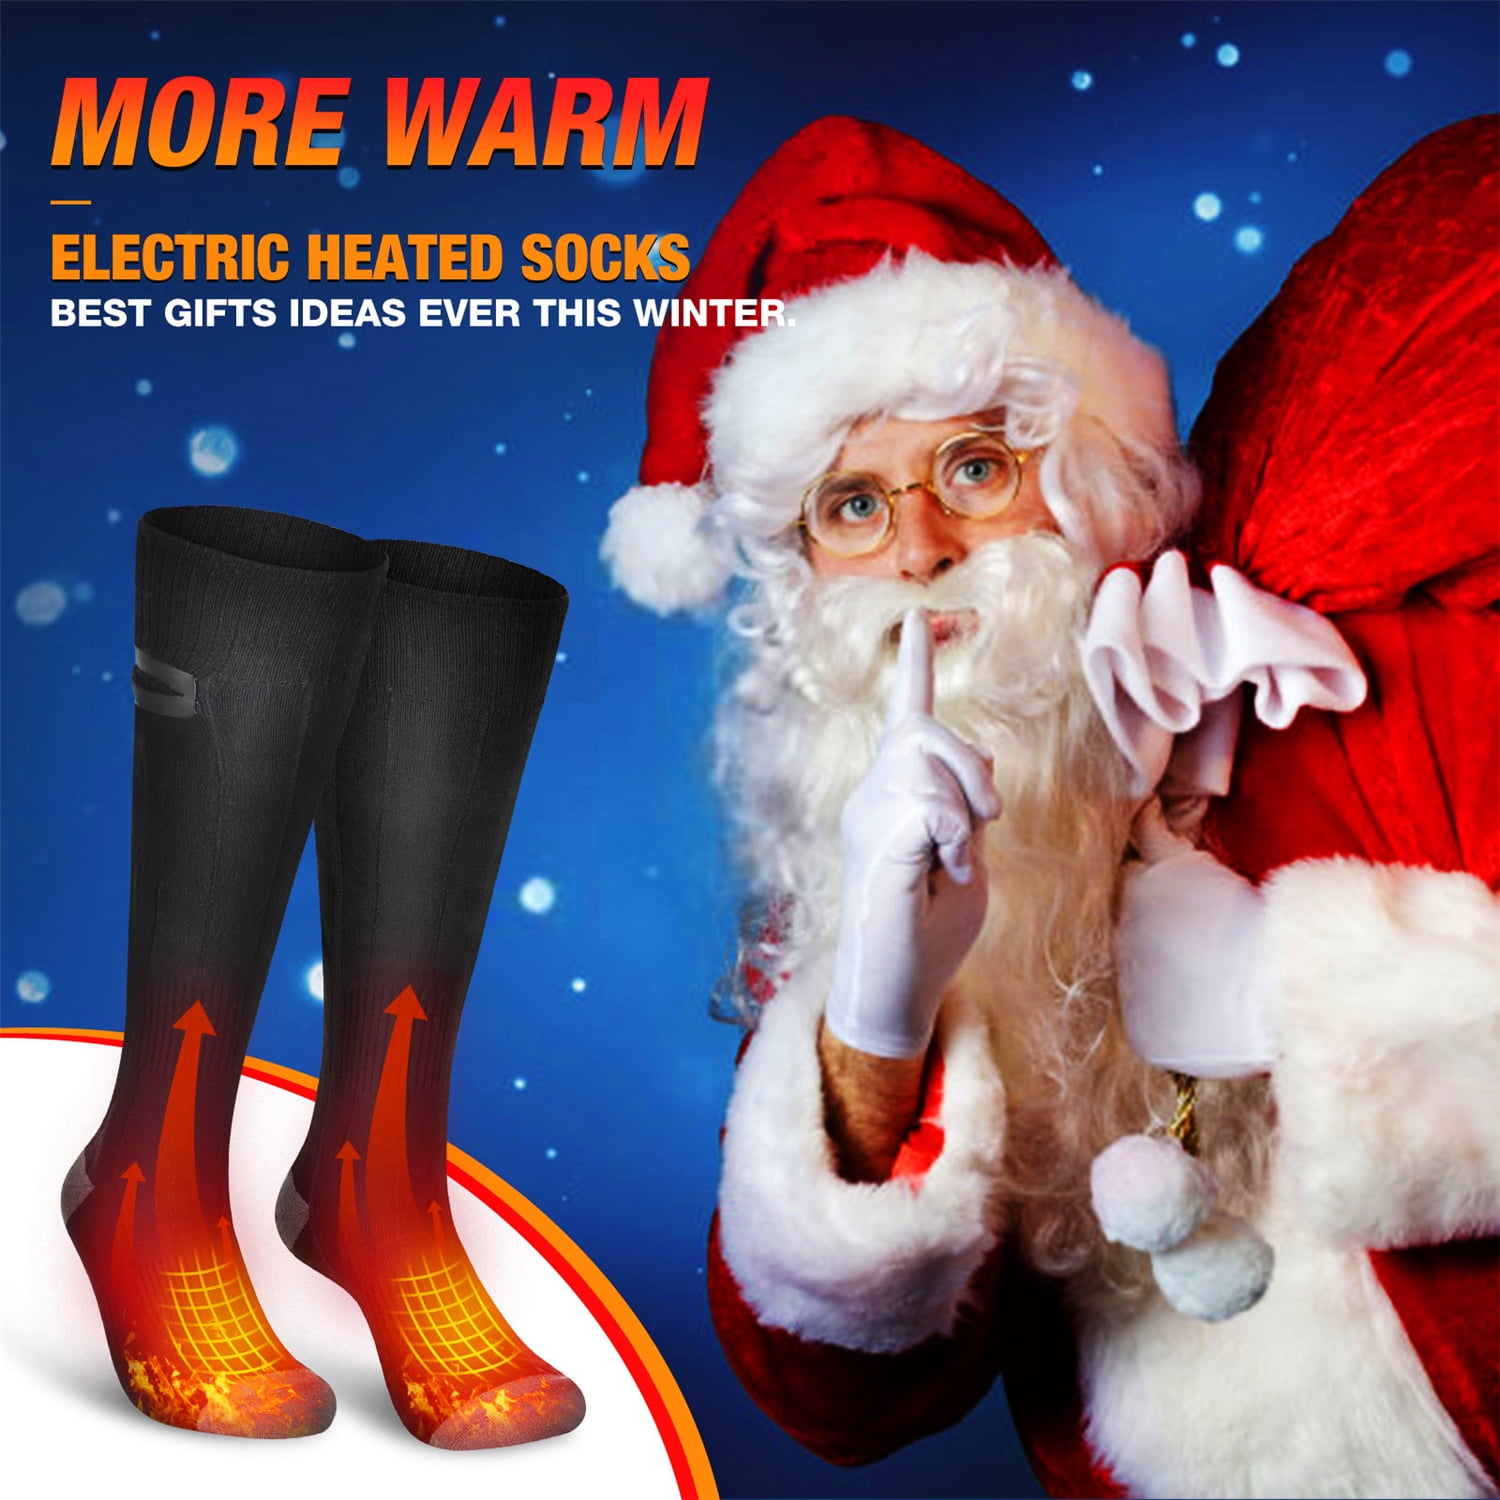 The Best Rechargeable Heated Clothing for Winter Cycling